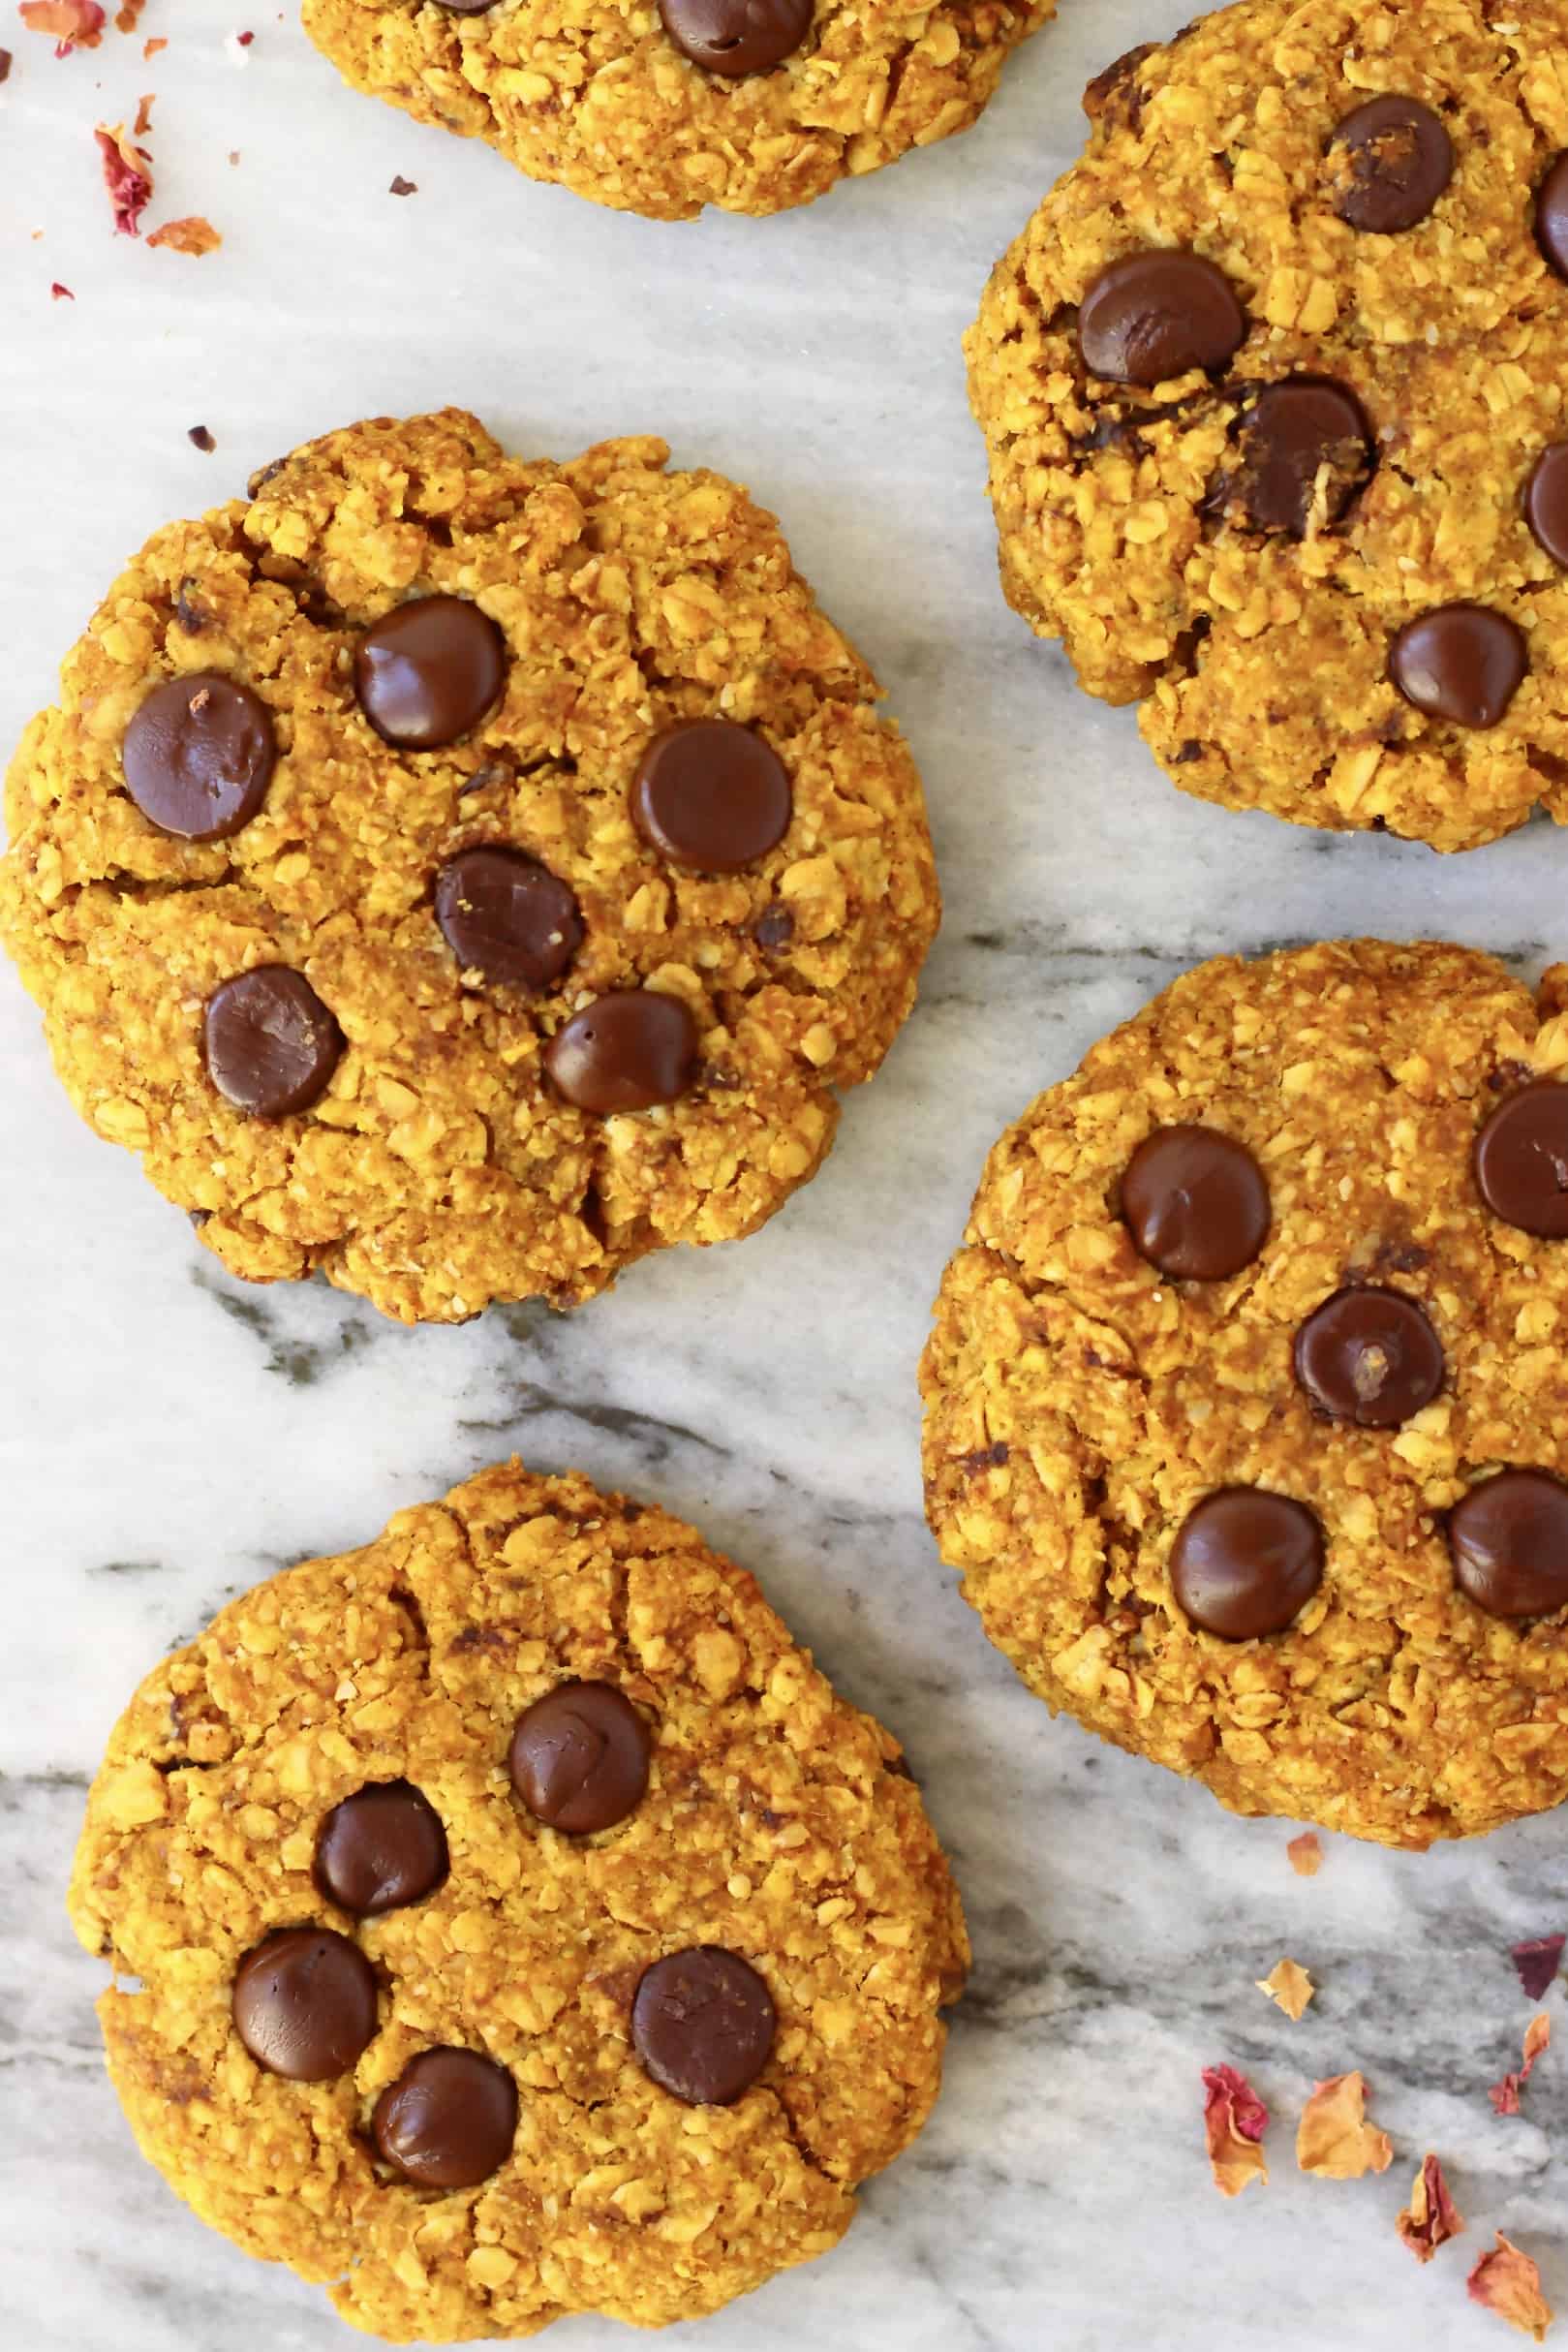 Five gluten-free vegan pumpkin cookies with chocolate chips against a marble background